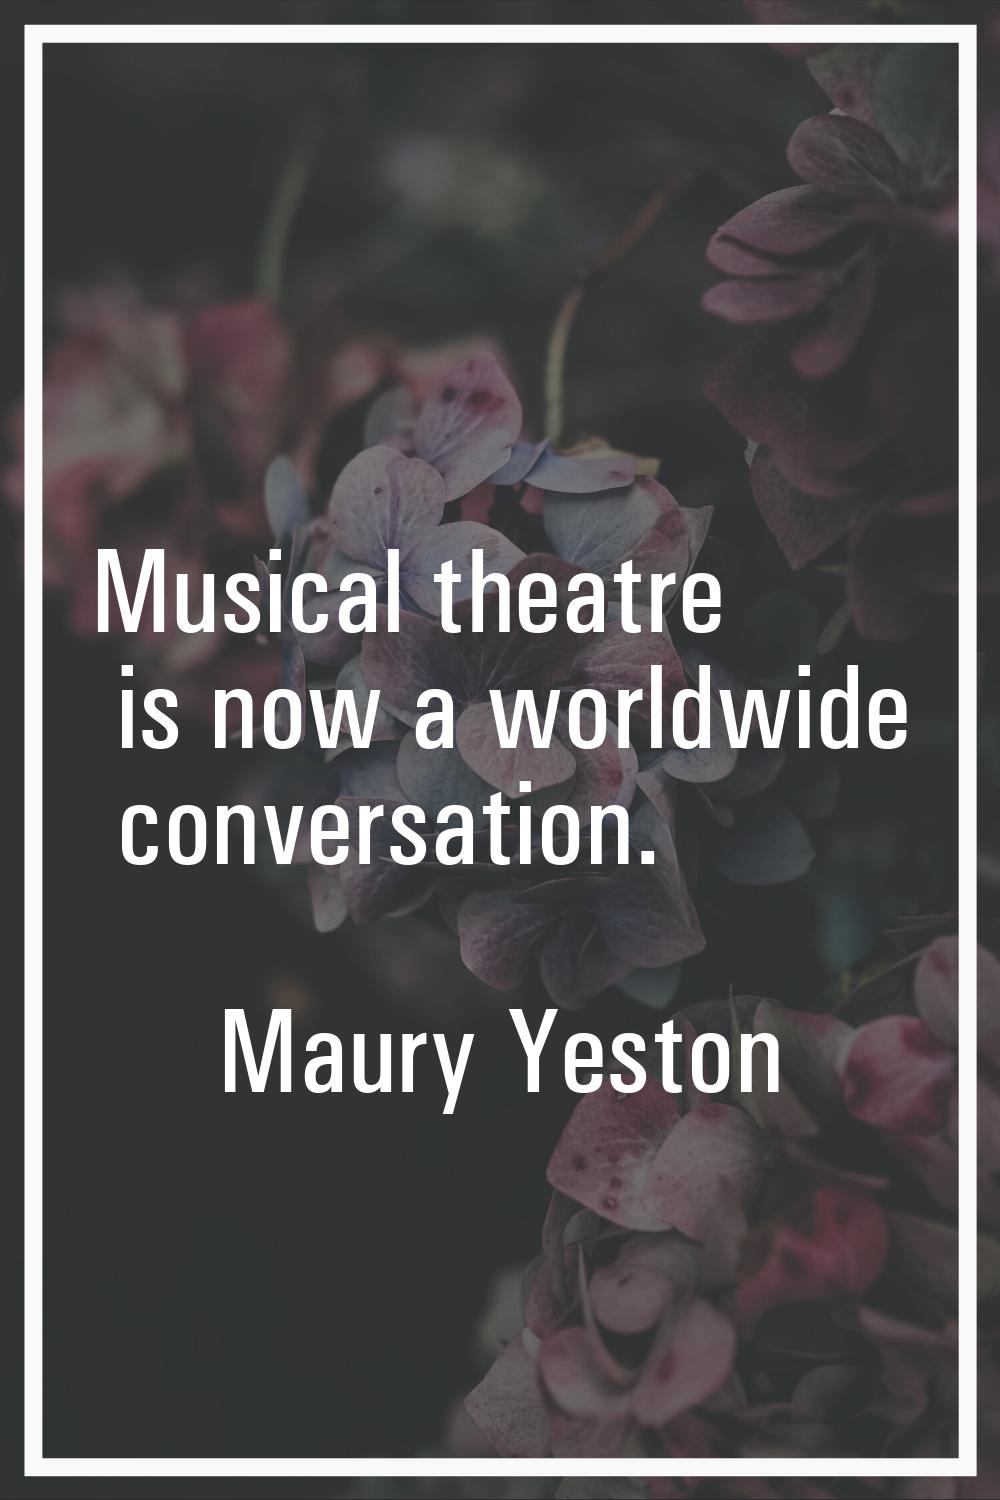 Musical theatre is now a worldwide conversation.